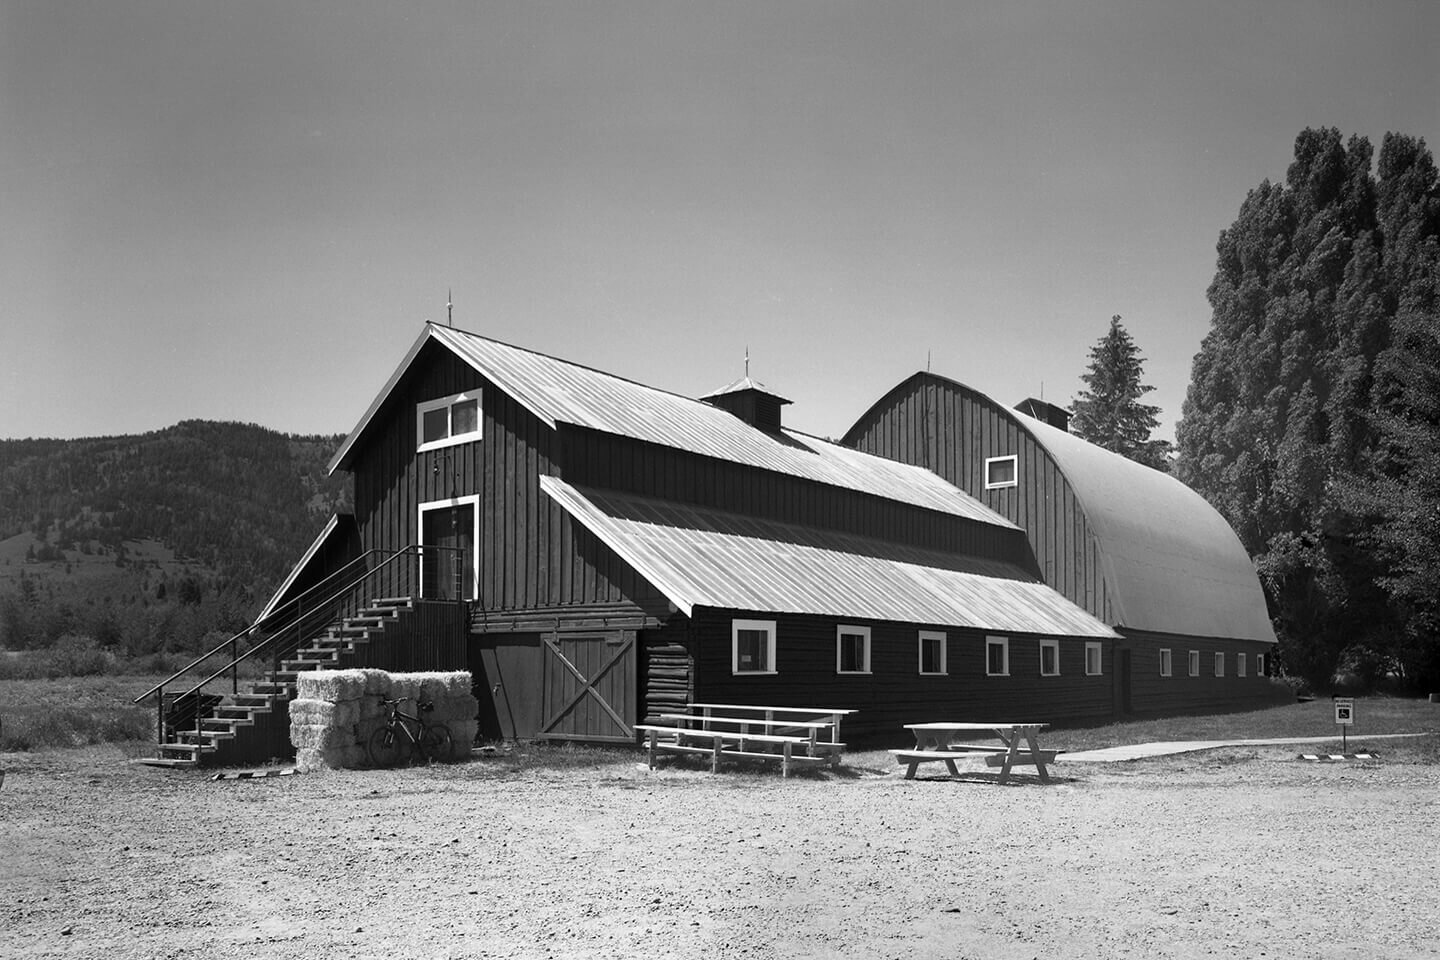 Two adjacent barns  with corrugated metal roofs